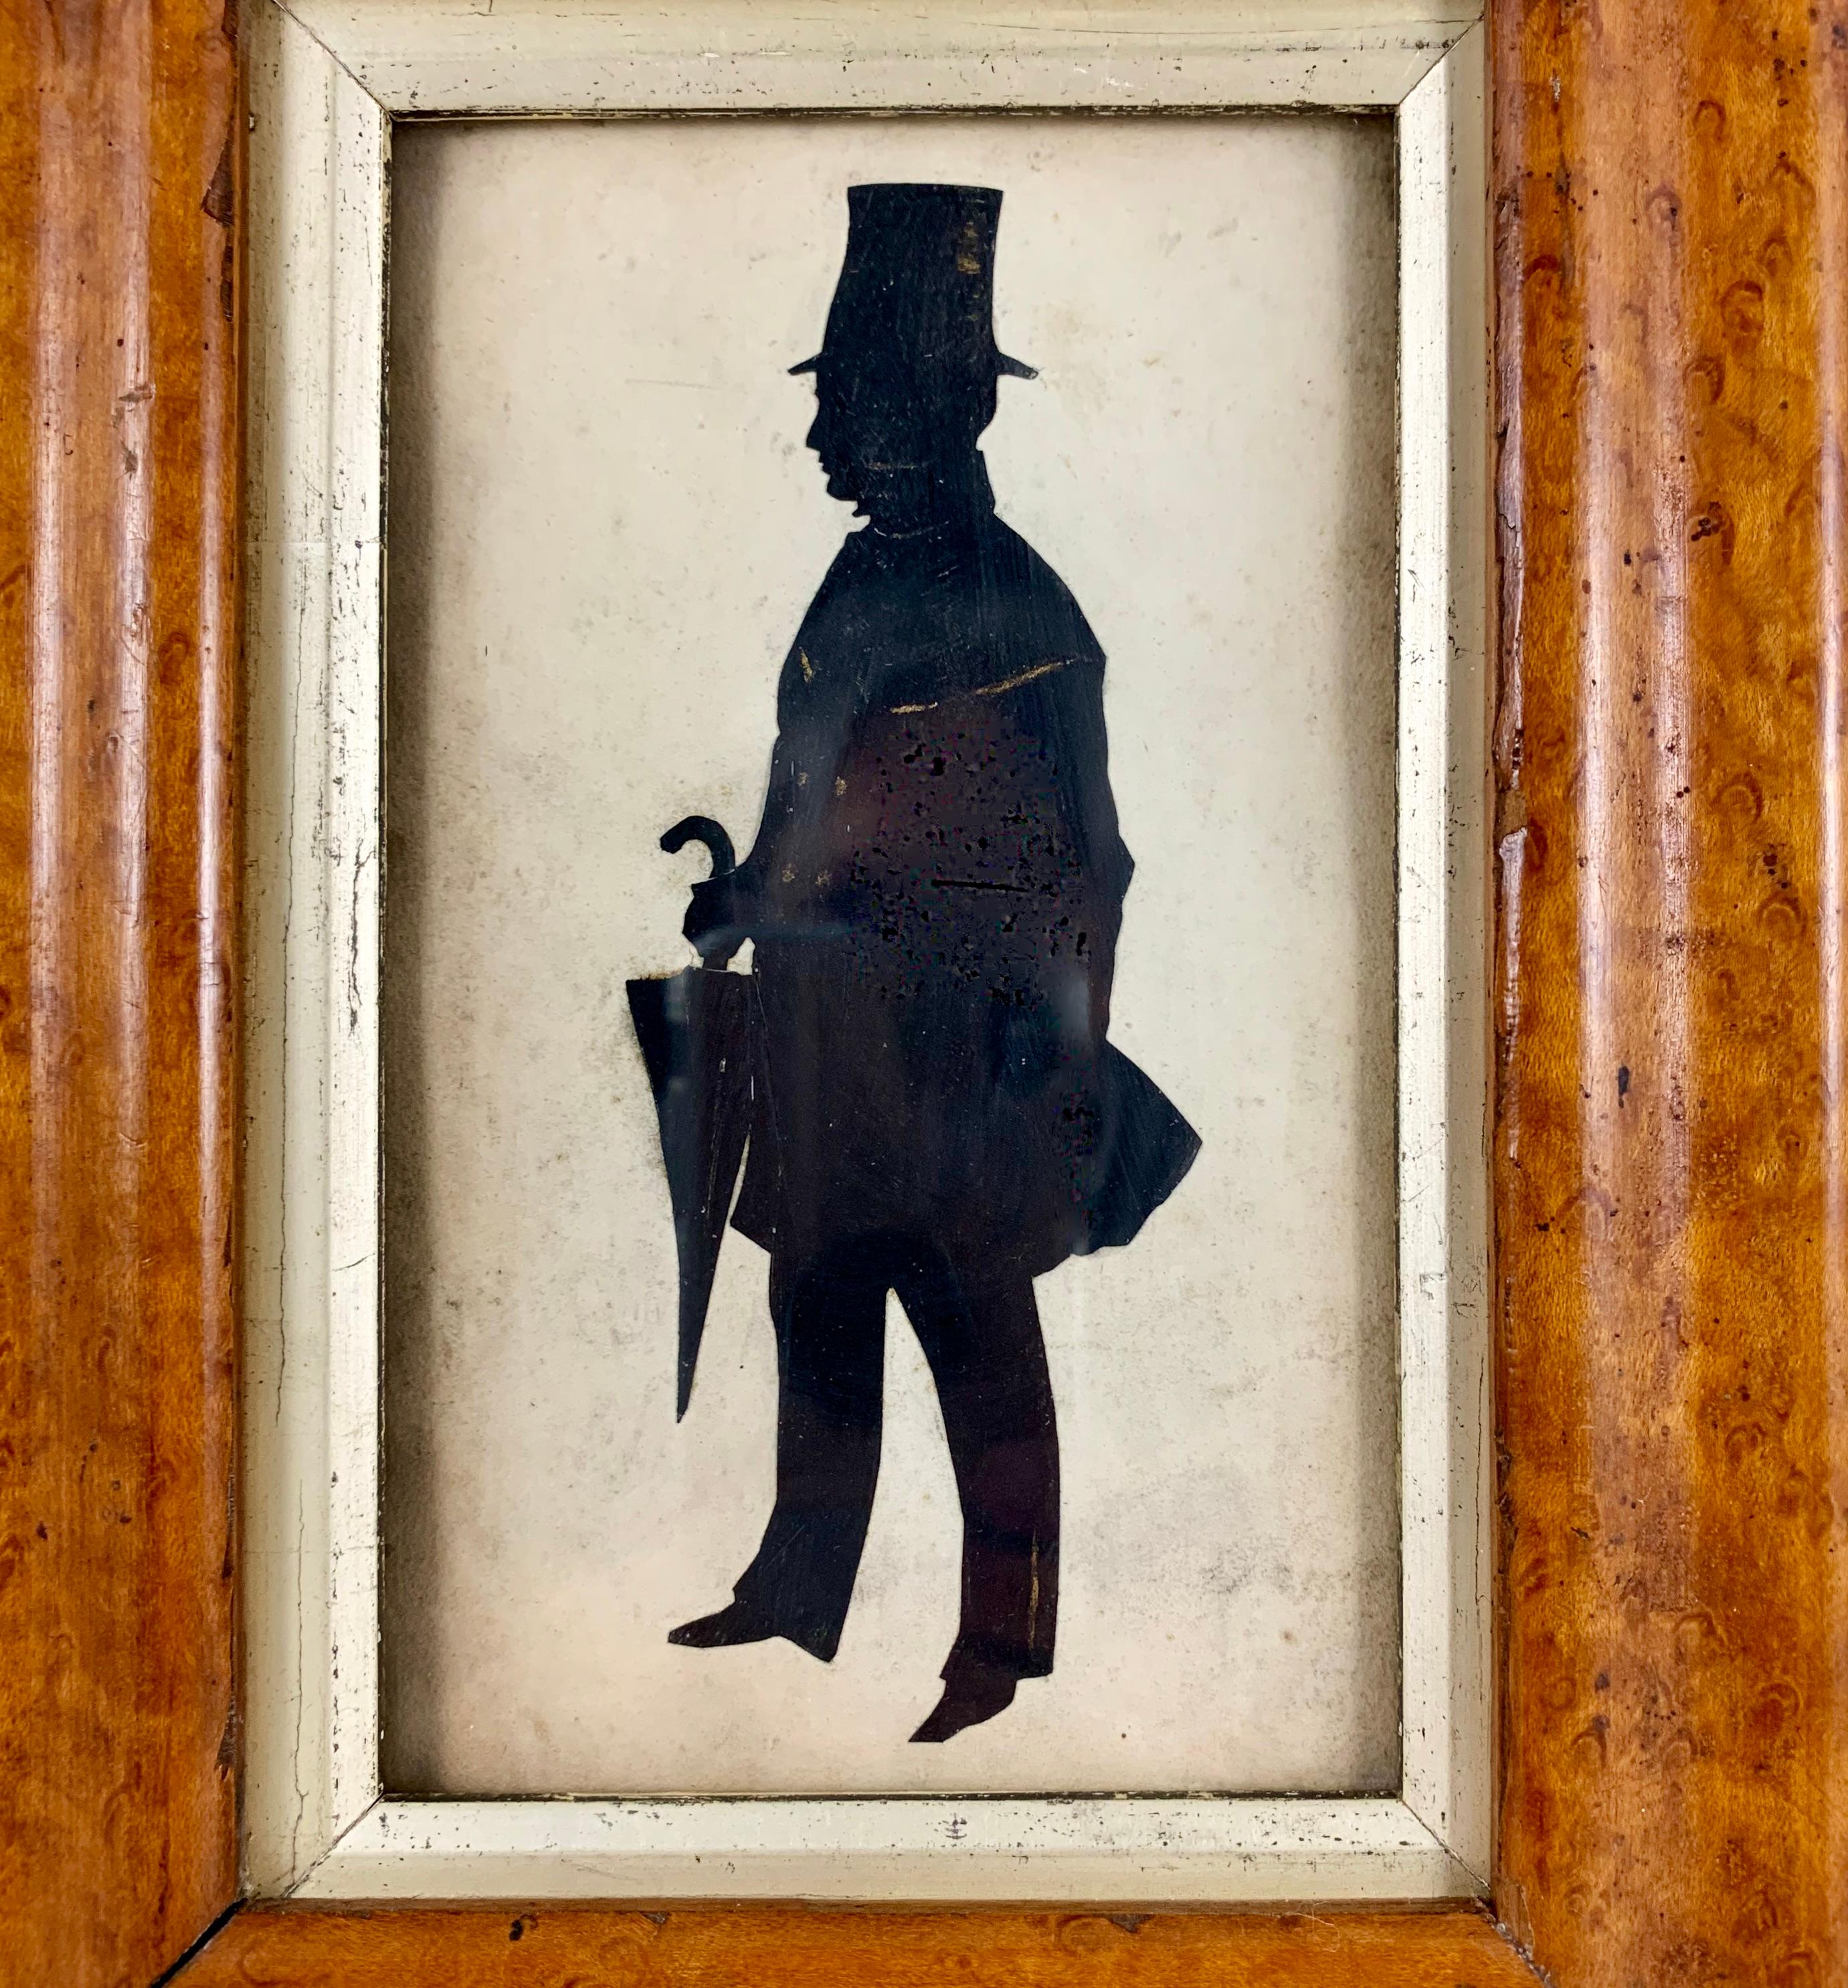 An original British School Georgian Period silhouette, circa 1850-1880, mounted in a period Maplewood frame. These watercolor silhouettes were largely painted by young girls from aristocratic families during the English Regency and Georgian periods.